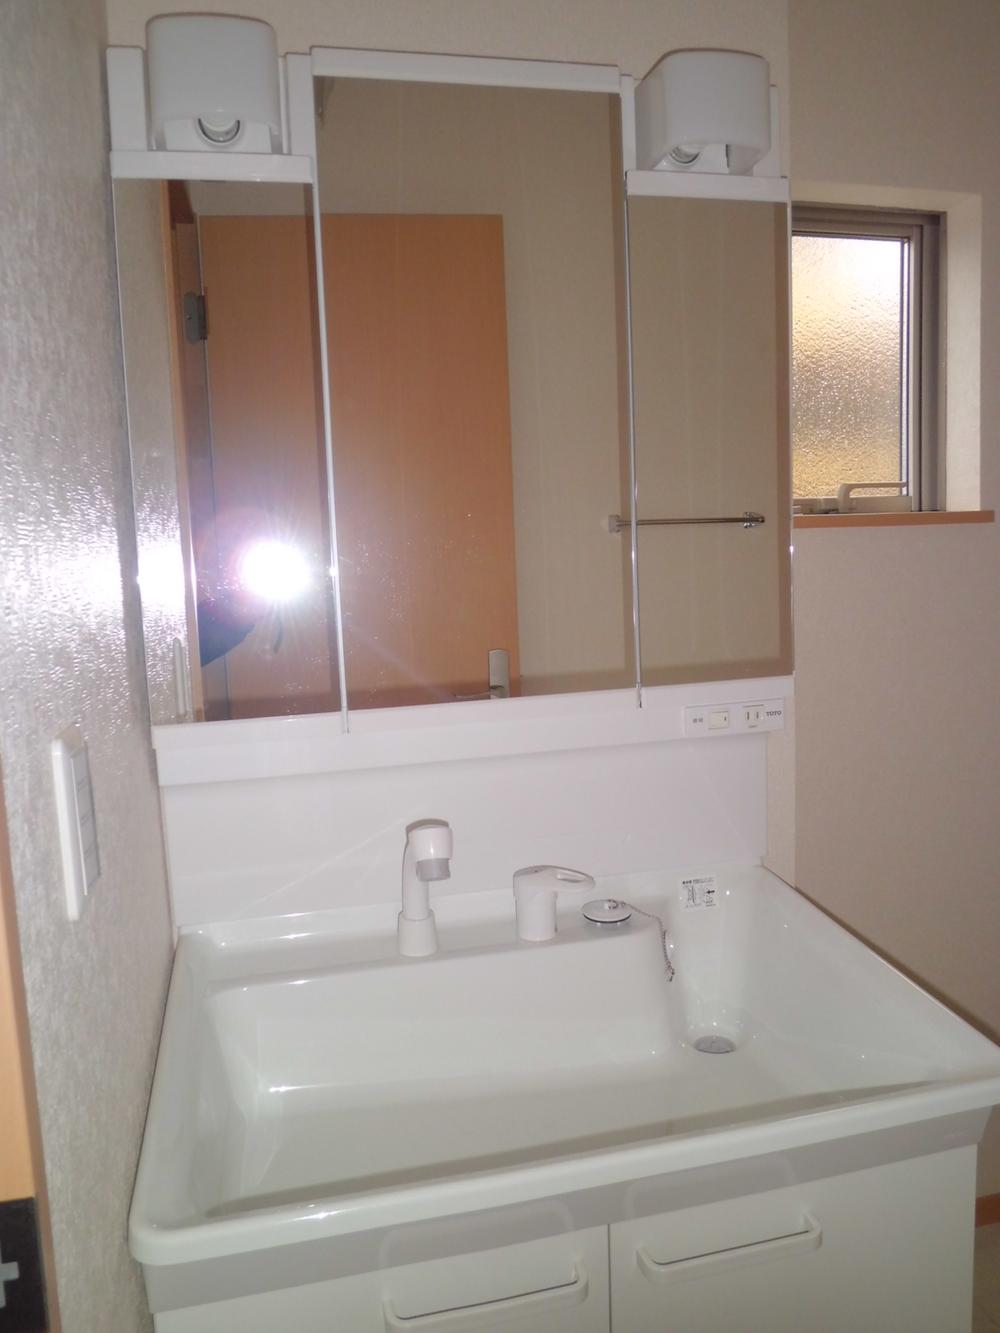 Other introspection. Same specifications Bathroom vanity